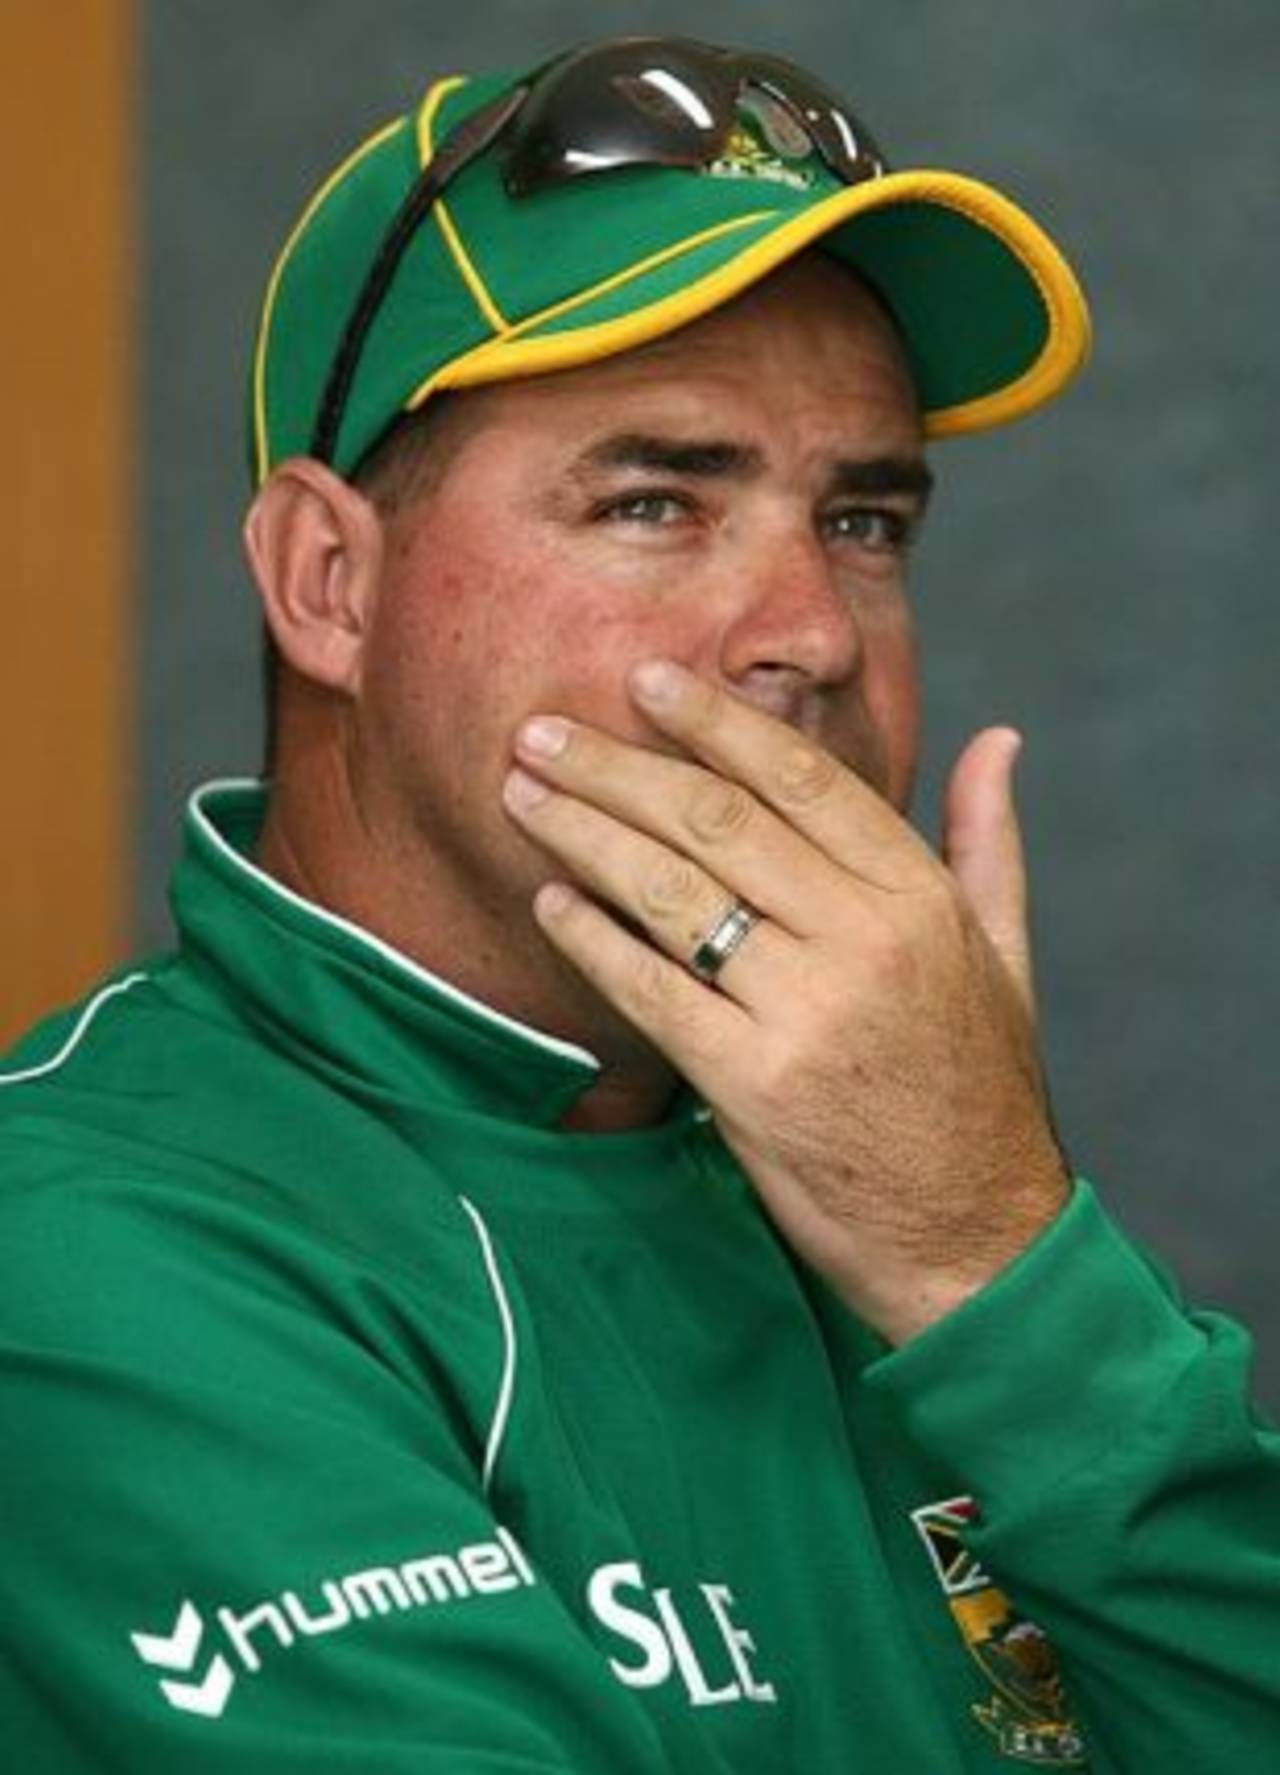 Too late Mickey Arthur realised as his molars cracked that the aliens had tampered with his toffee&nbsp;&nbsp;&bull;&nbsp;&nbsp;Getty Images